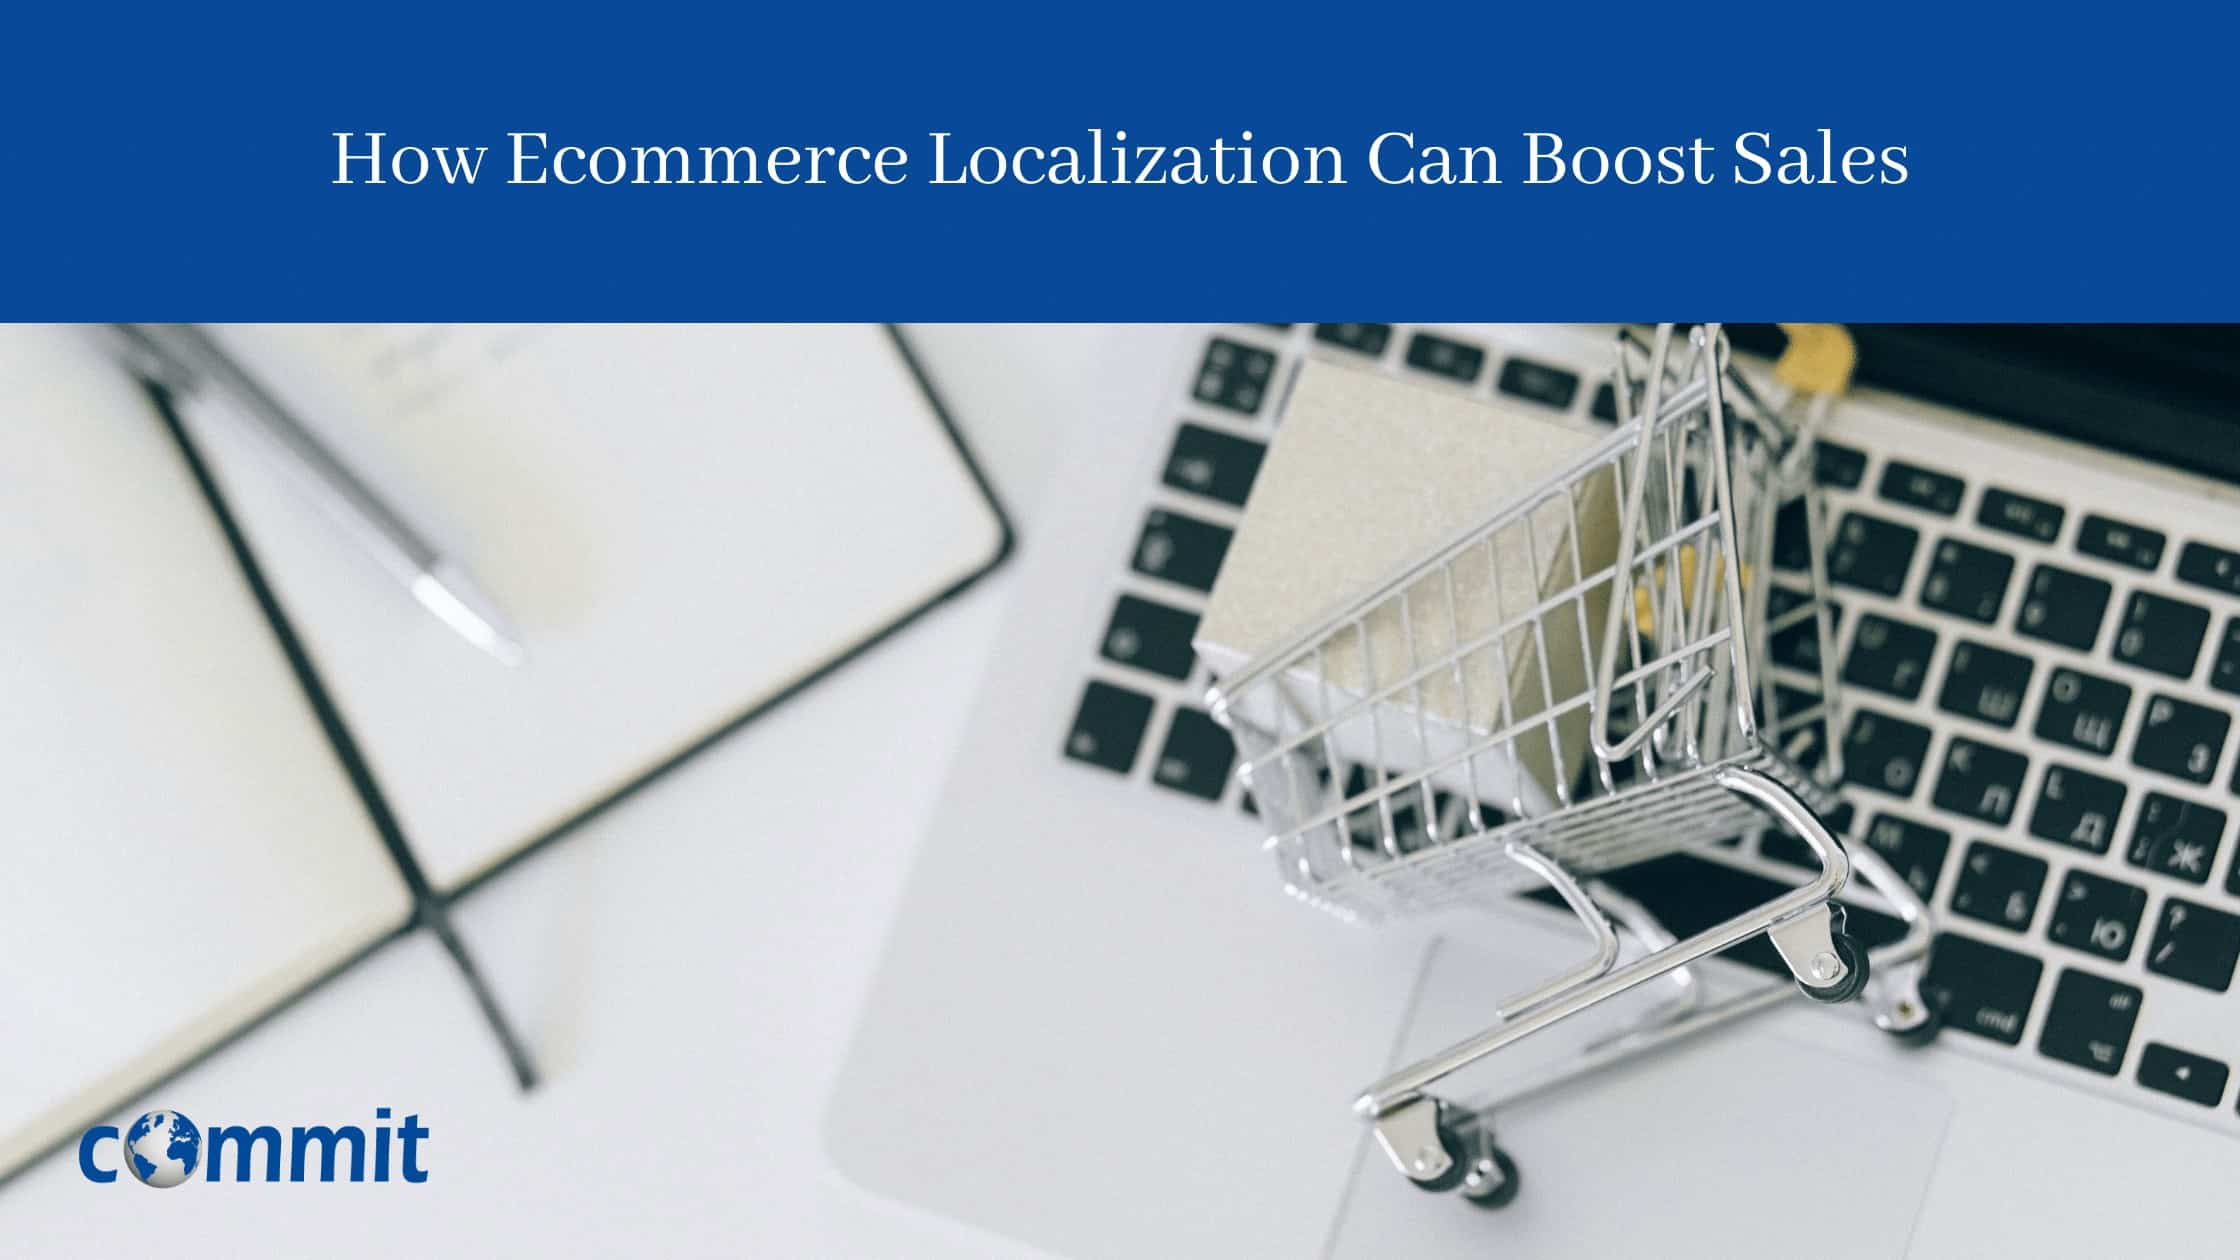 How Ecommerce Localization Can Boost Sales